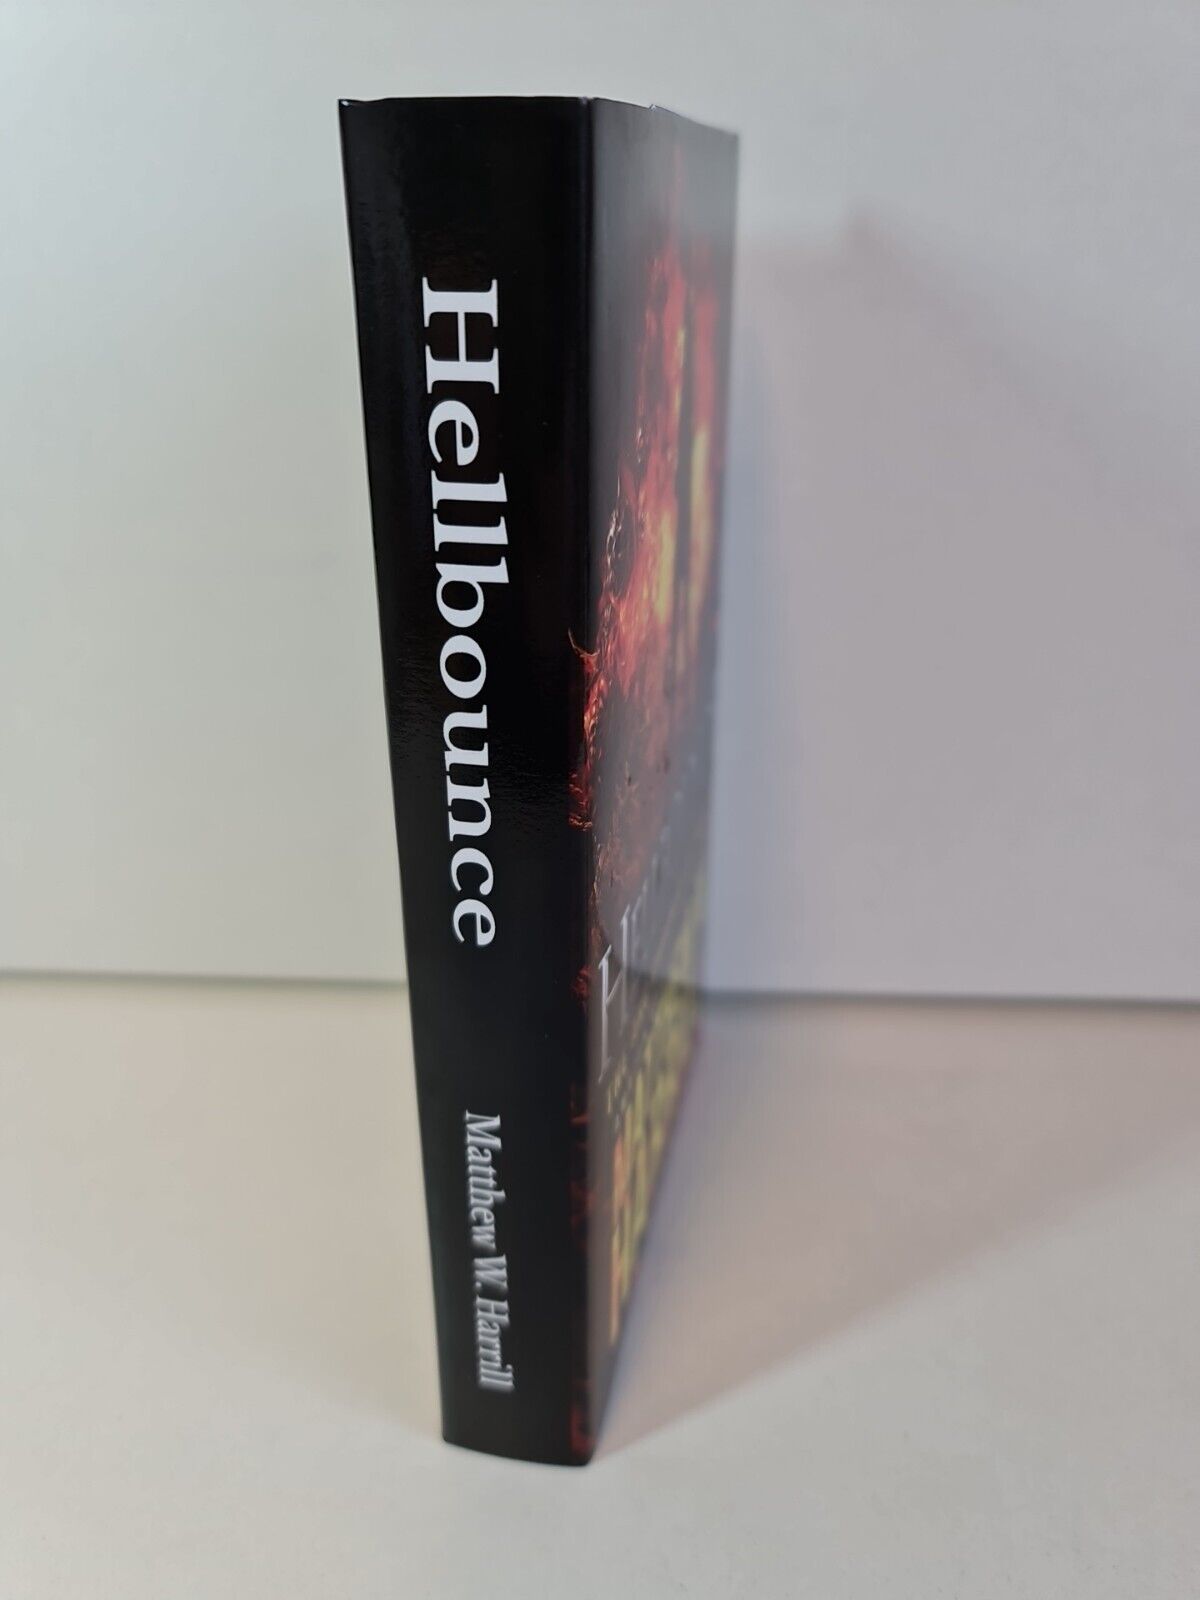 Hellbounce by Matthew Harrill - Premium Hardcover Edition 2021 - Arch Chronicles